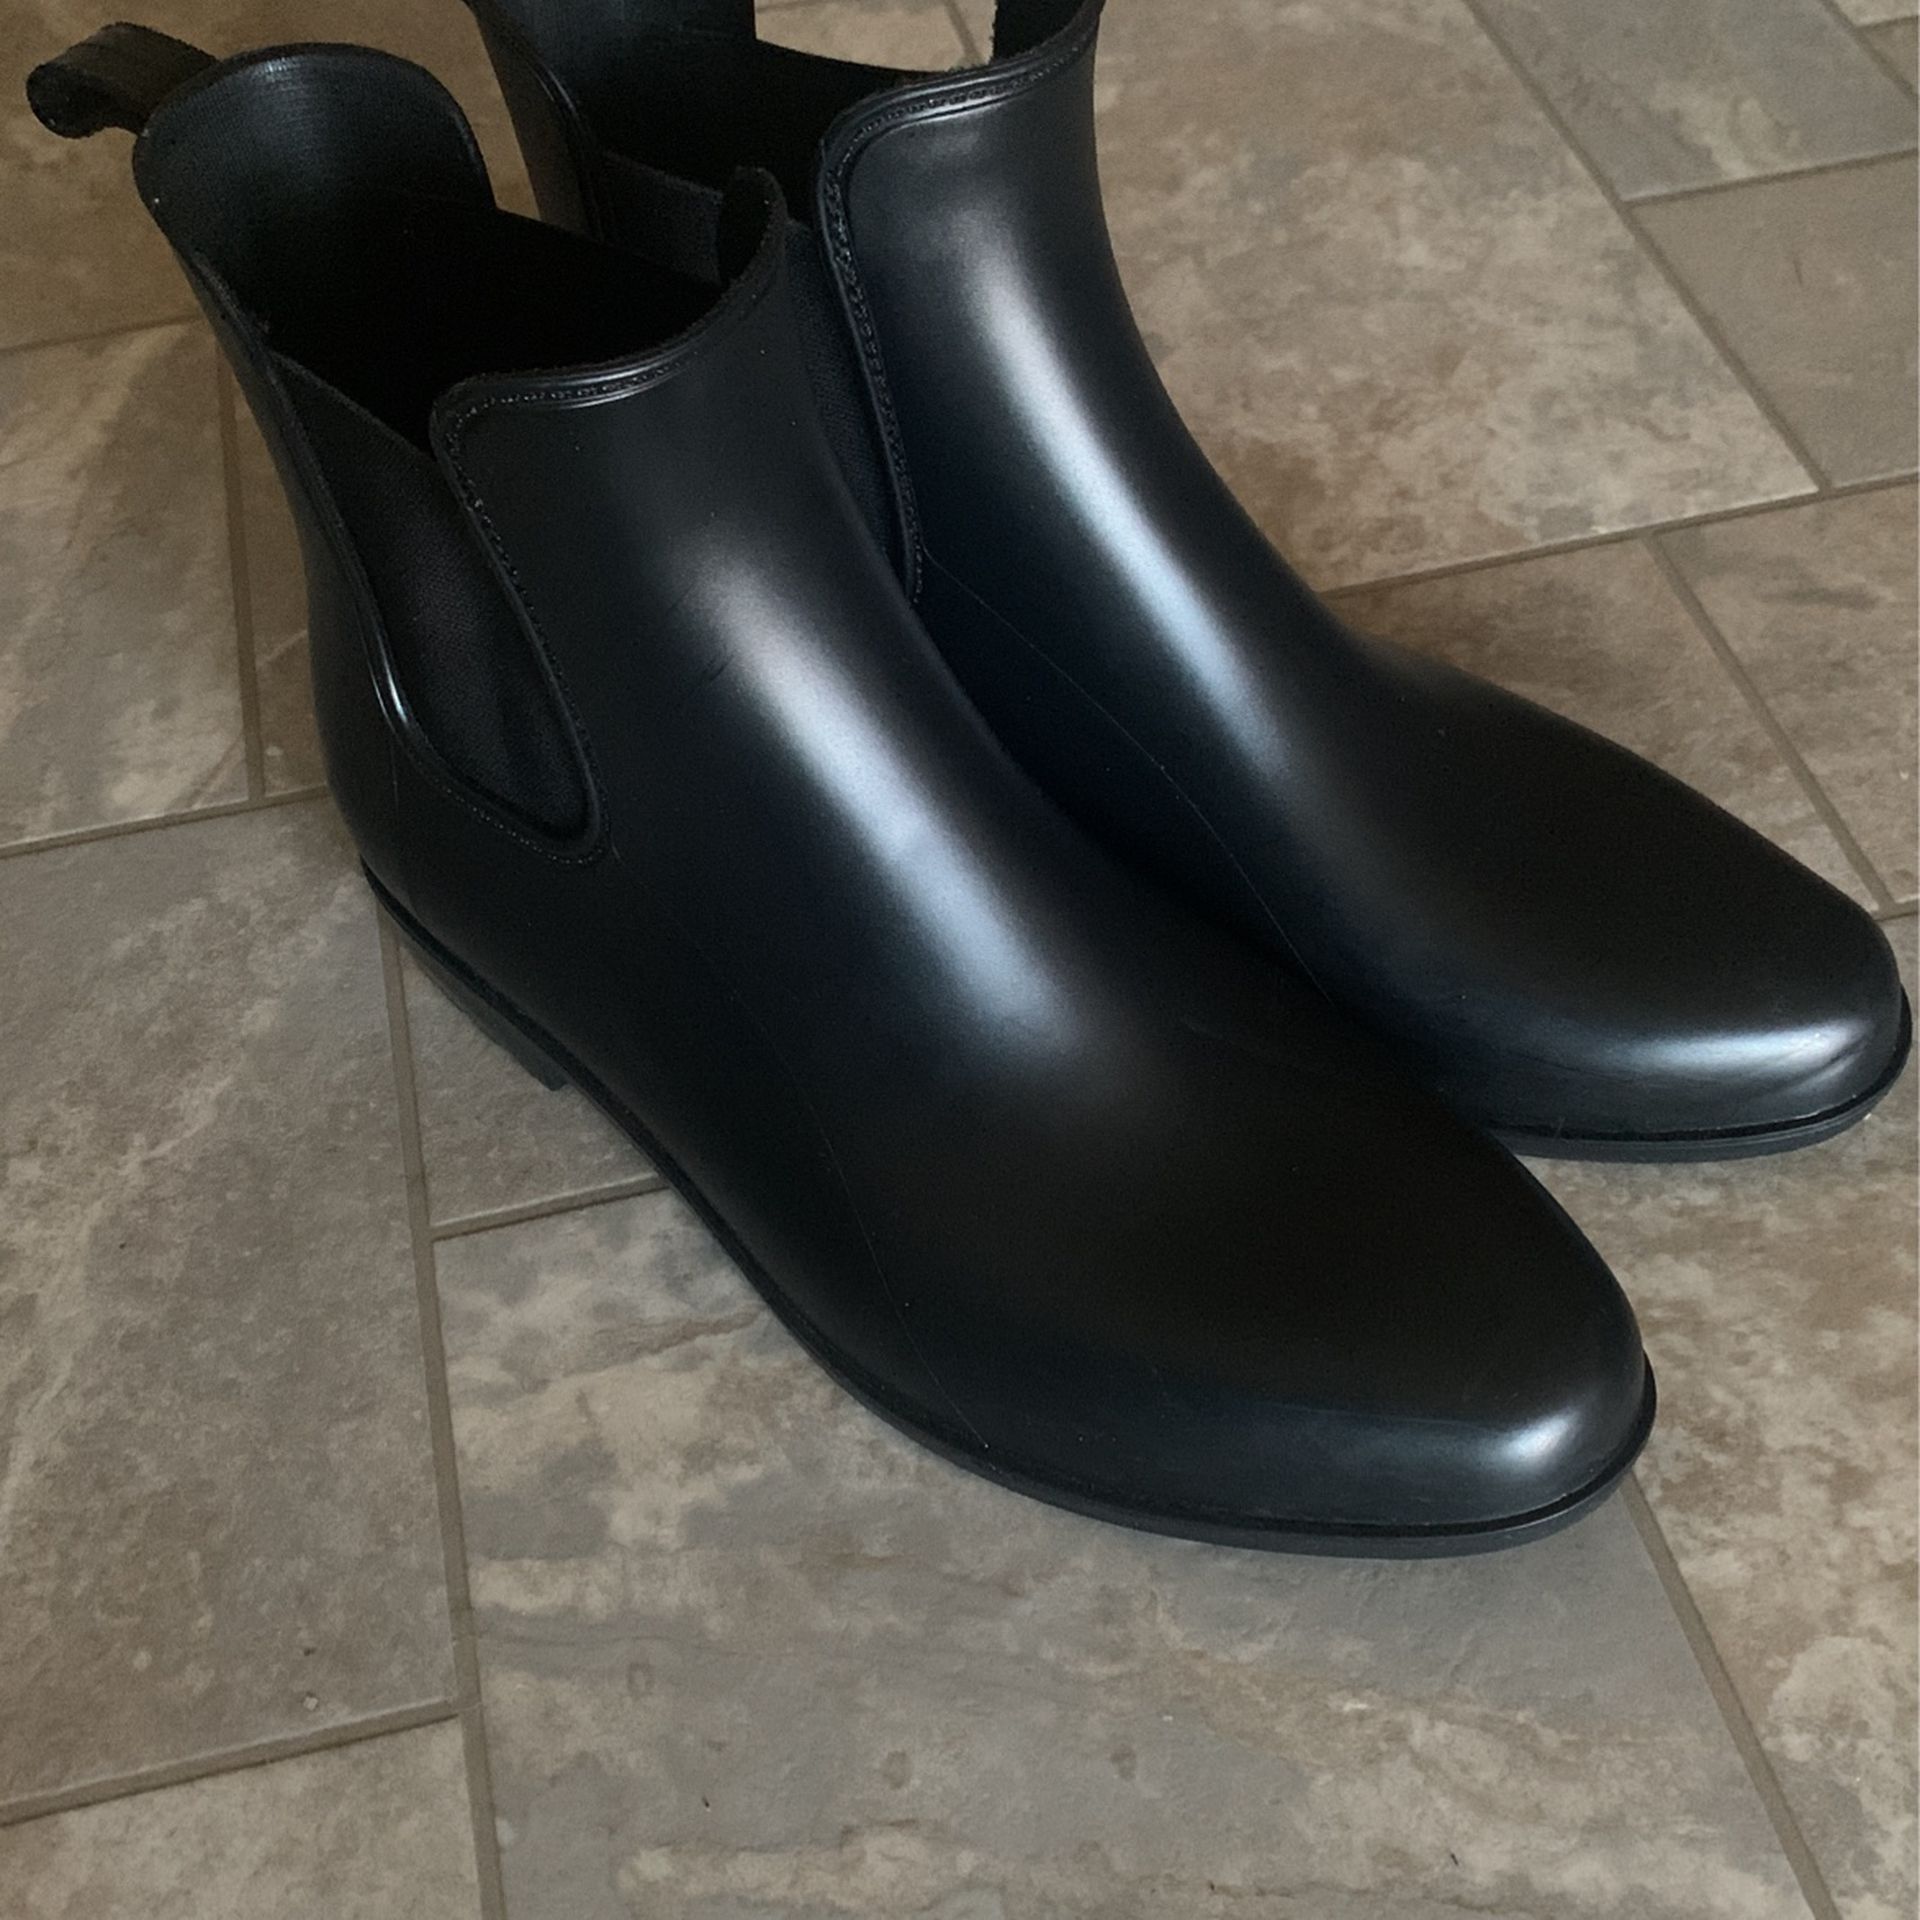 New Black Leather Boots $15